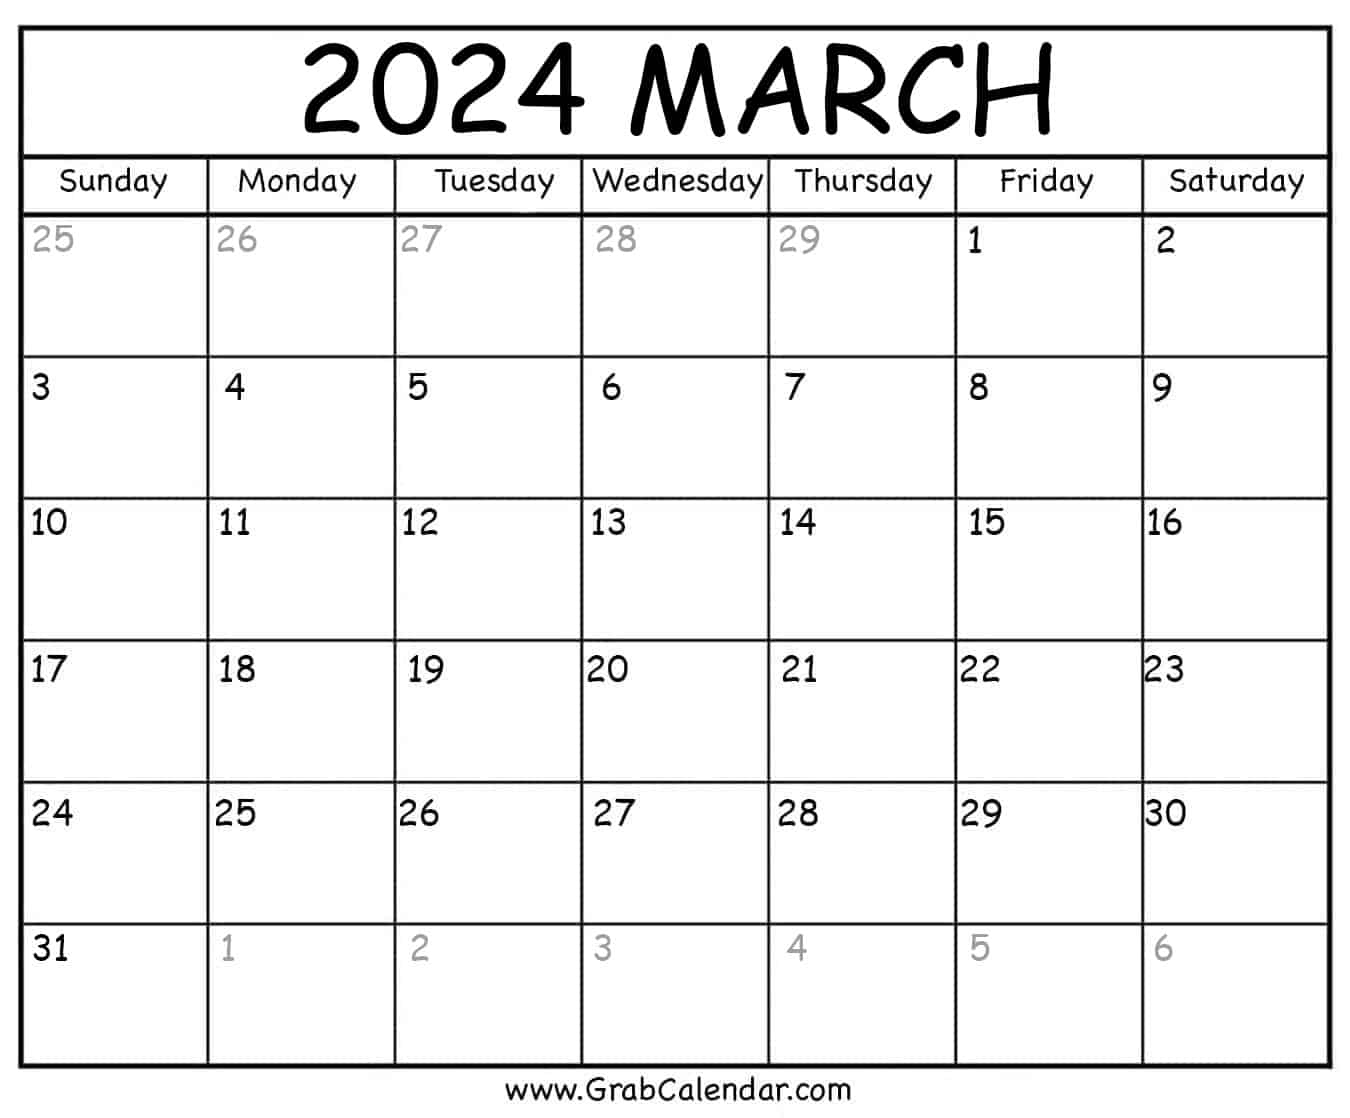 Printable March 2024 Calendar intended for Free Printable Blank Calendar March 2024